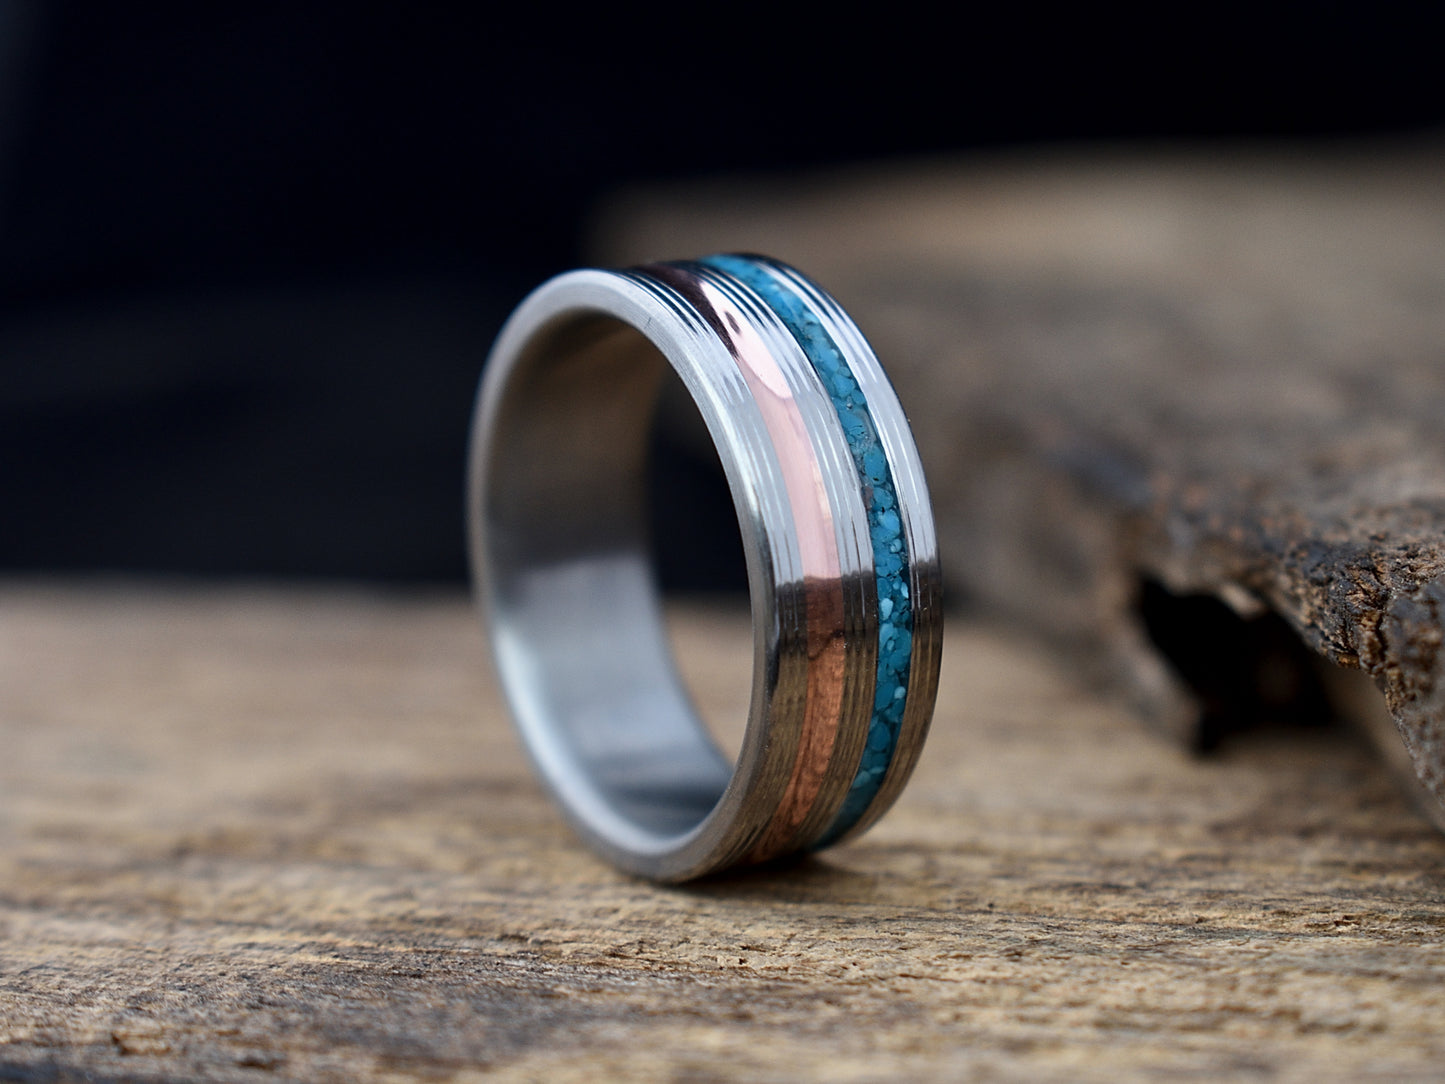 Paradox - Copper and Turquoise Inlay Men's Ring